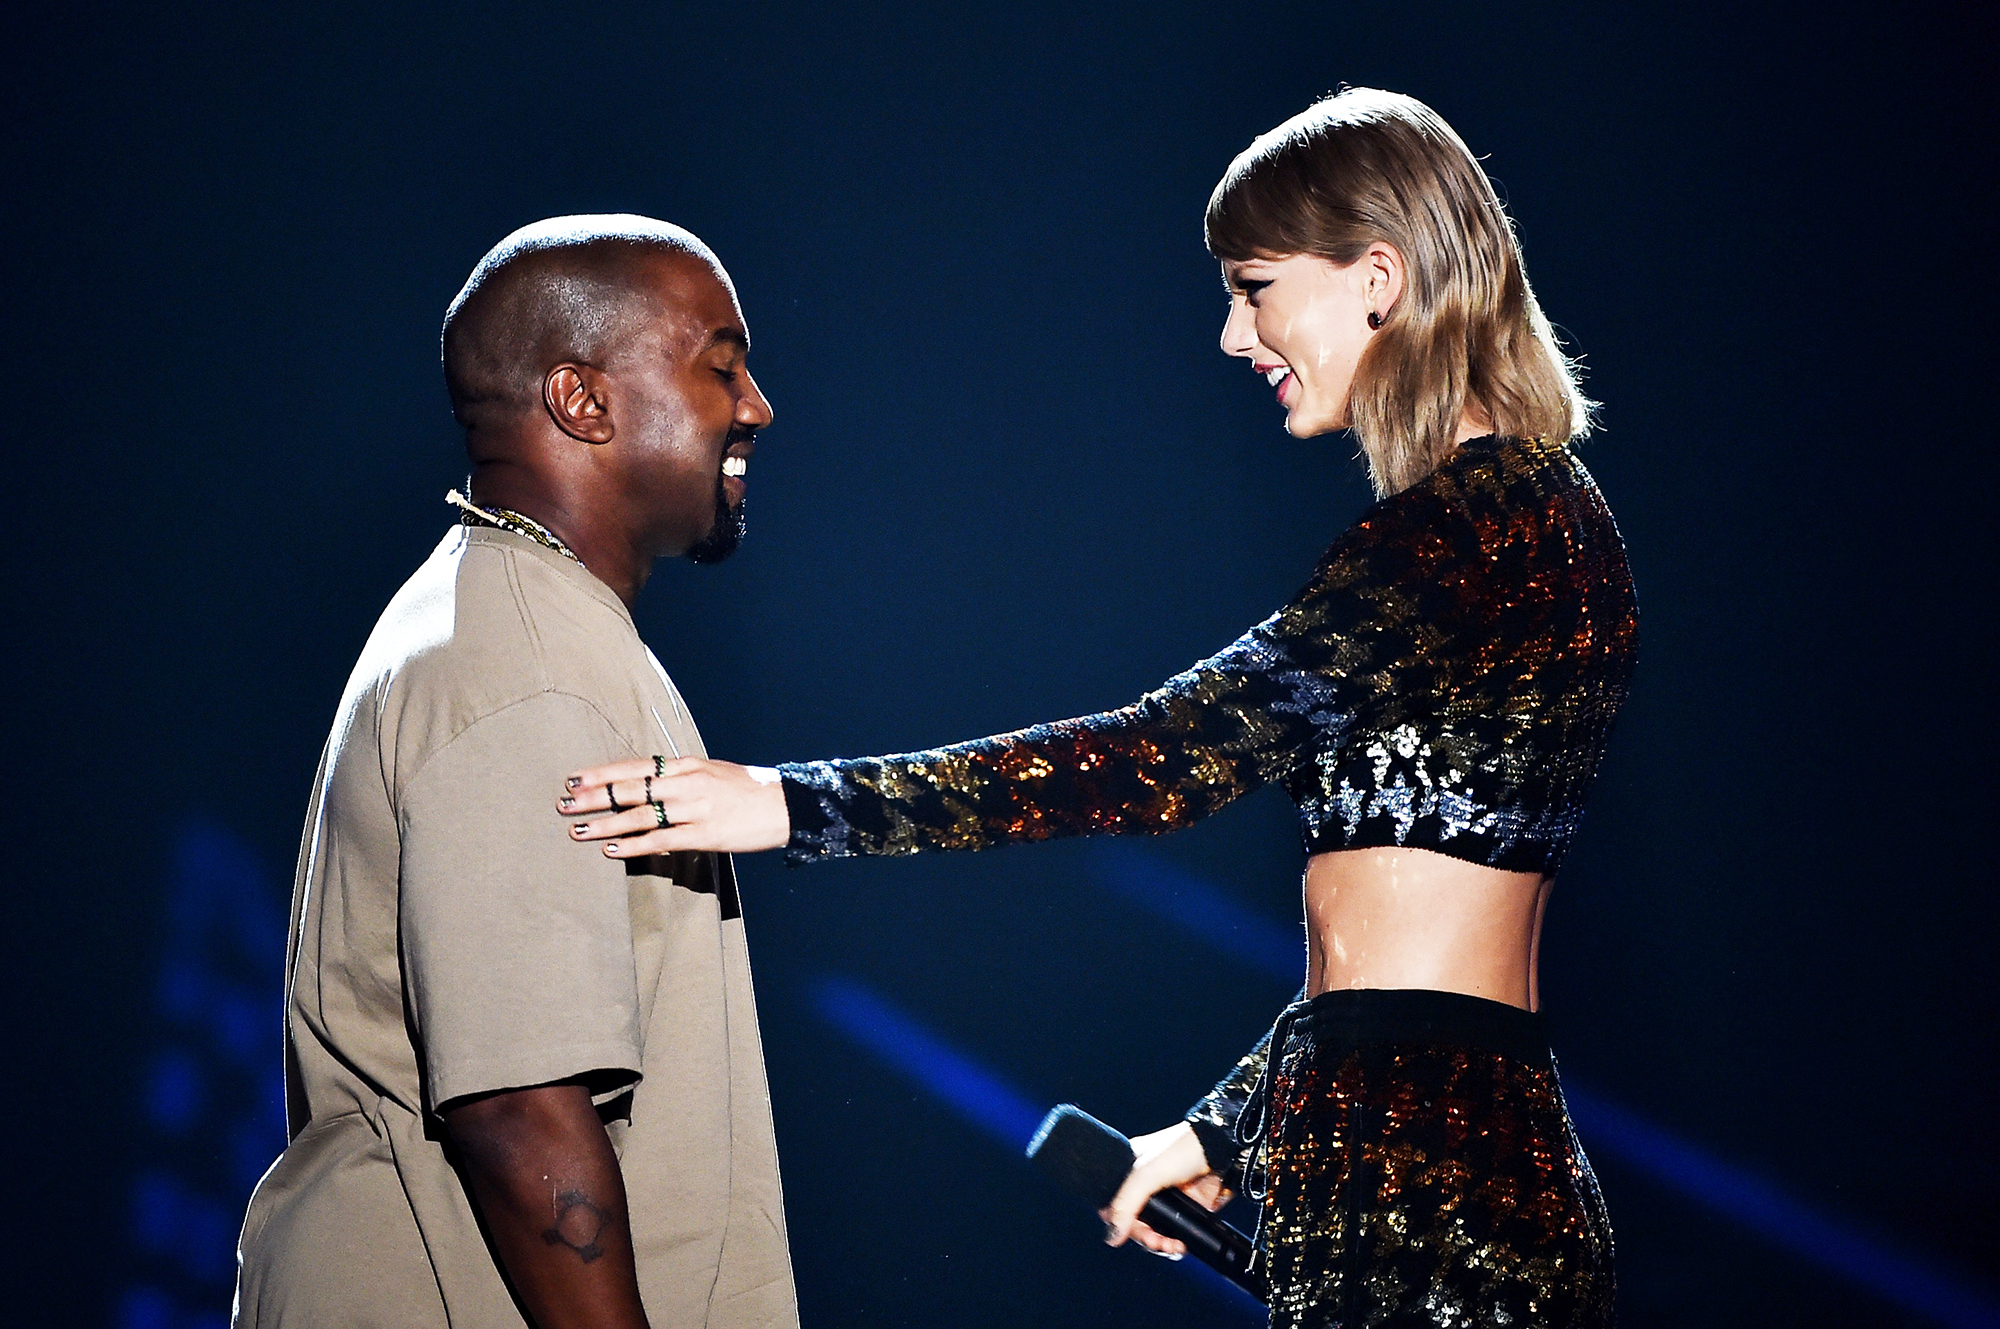 Kanye West, left, accepts the Video Vanguard Award from Taylor Swift onstage during the 2015 MTV VMAs in Los Angeles, on Aug. 30, 2015. (Kevin Winter—Getty Images)